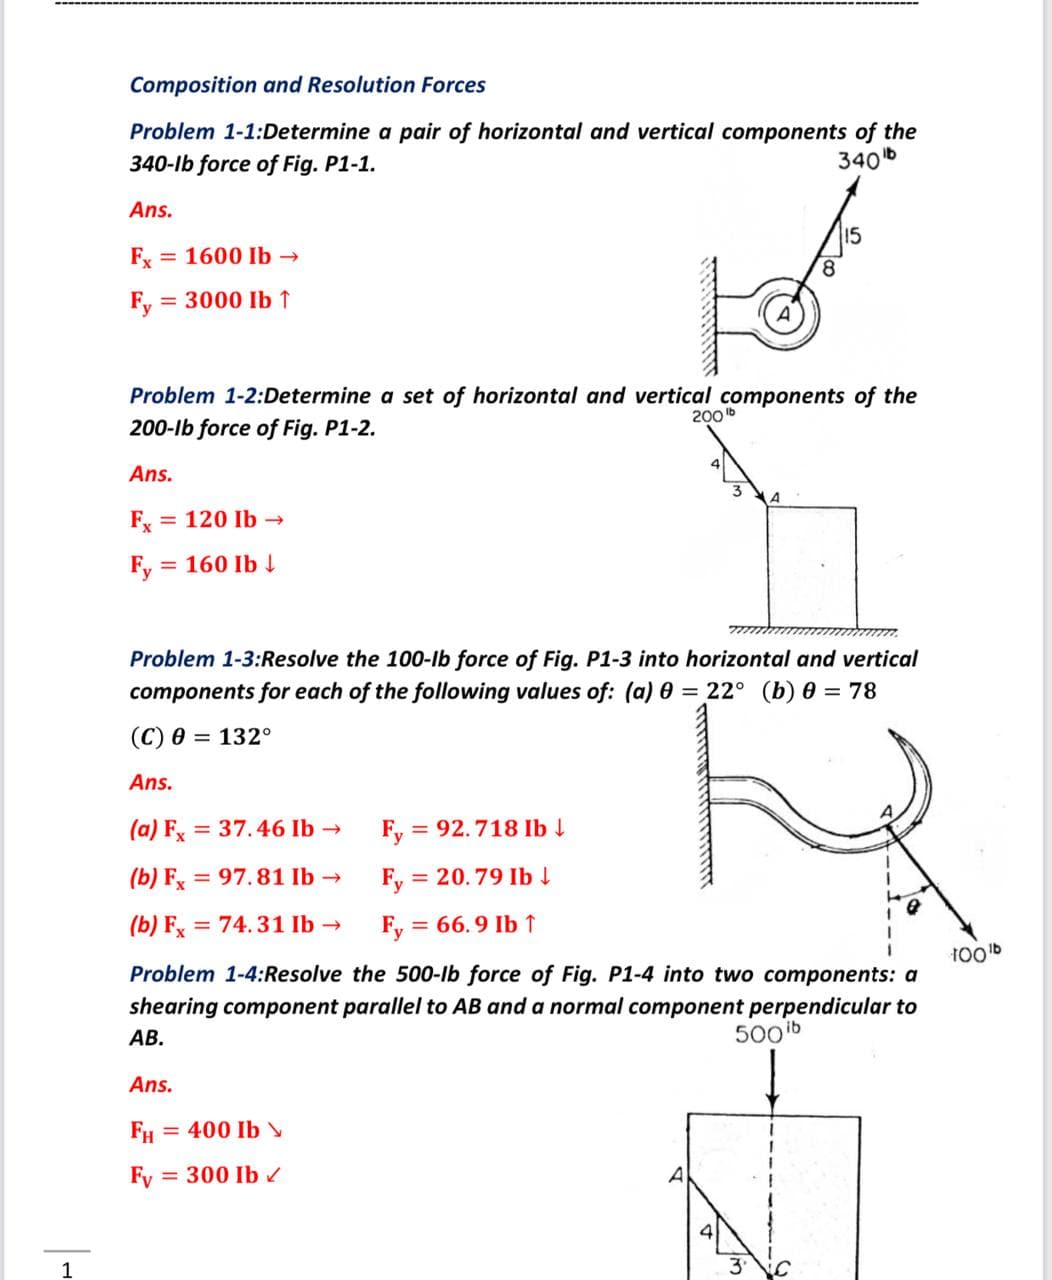 Composition and Resolution Forces
Problem 1-1:Determine a pair of horizontal and vertical components of the
340-lb force of Fig. P1-1.
340b
Ans.
15
Fx = 1600 Ib →
8.
Fy
= 3000 Ib ↑
Problem 1-2:Determine a set of horizontal and vertical components of the
200b
200-lb force of Fig. P1-2.
Ans.
Fx
= 120 Ib -
Fy =
160 Ib 4
Problem 1-3:Resolve the 100-lb force of Fig. P1-3 into horizontal and vertical
components for each of the following values of: (a) 0 = 22° (b) 0 = 78
(С) 0 — 132°
Ans.
(a) Fx = 37.46 Ib →
Fy
= 92.718 Ib
(b) Fx = 97.81 Ib →
Fy = 20.79 Ib
(b) Fx = 74.31 Ib -
Fy = 66.9 Ib ↑
%3D
100b
Problem 1-4:Resolve the 500-lb force of Fig. P1-4 into two components: a
shearing component parallel to AB and a normal component perpendicular to
АВ.
500 ib
Ans.
FH
= 400 Ib
Fy
= 300 Ib
1
3'
